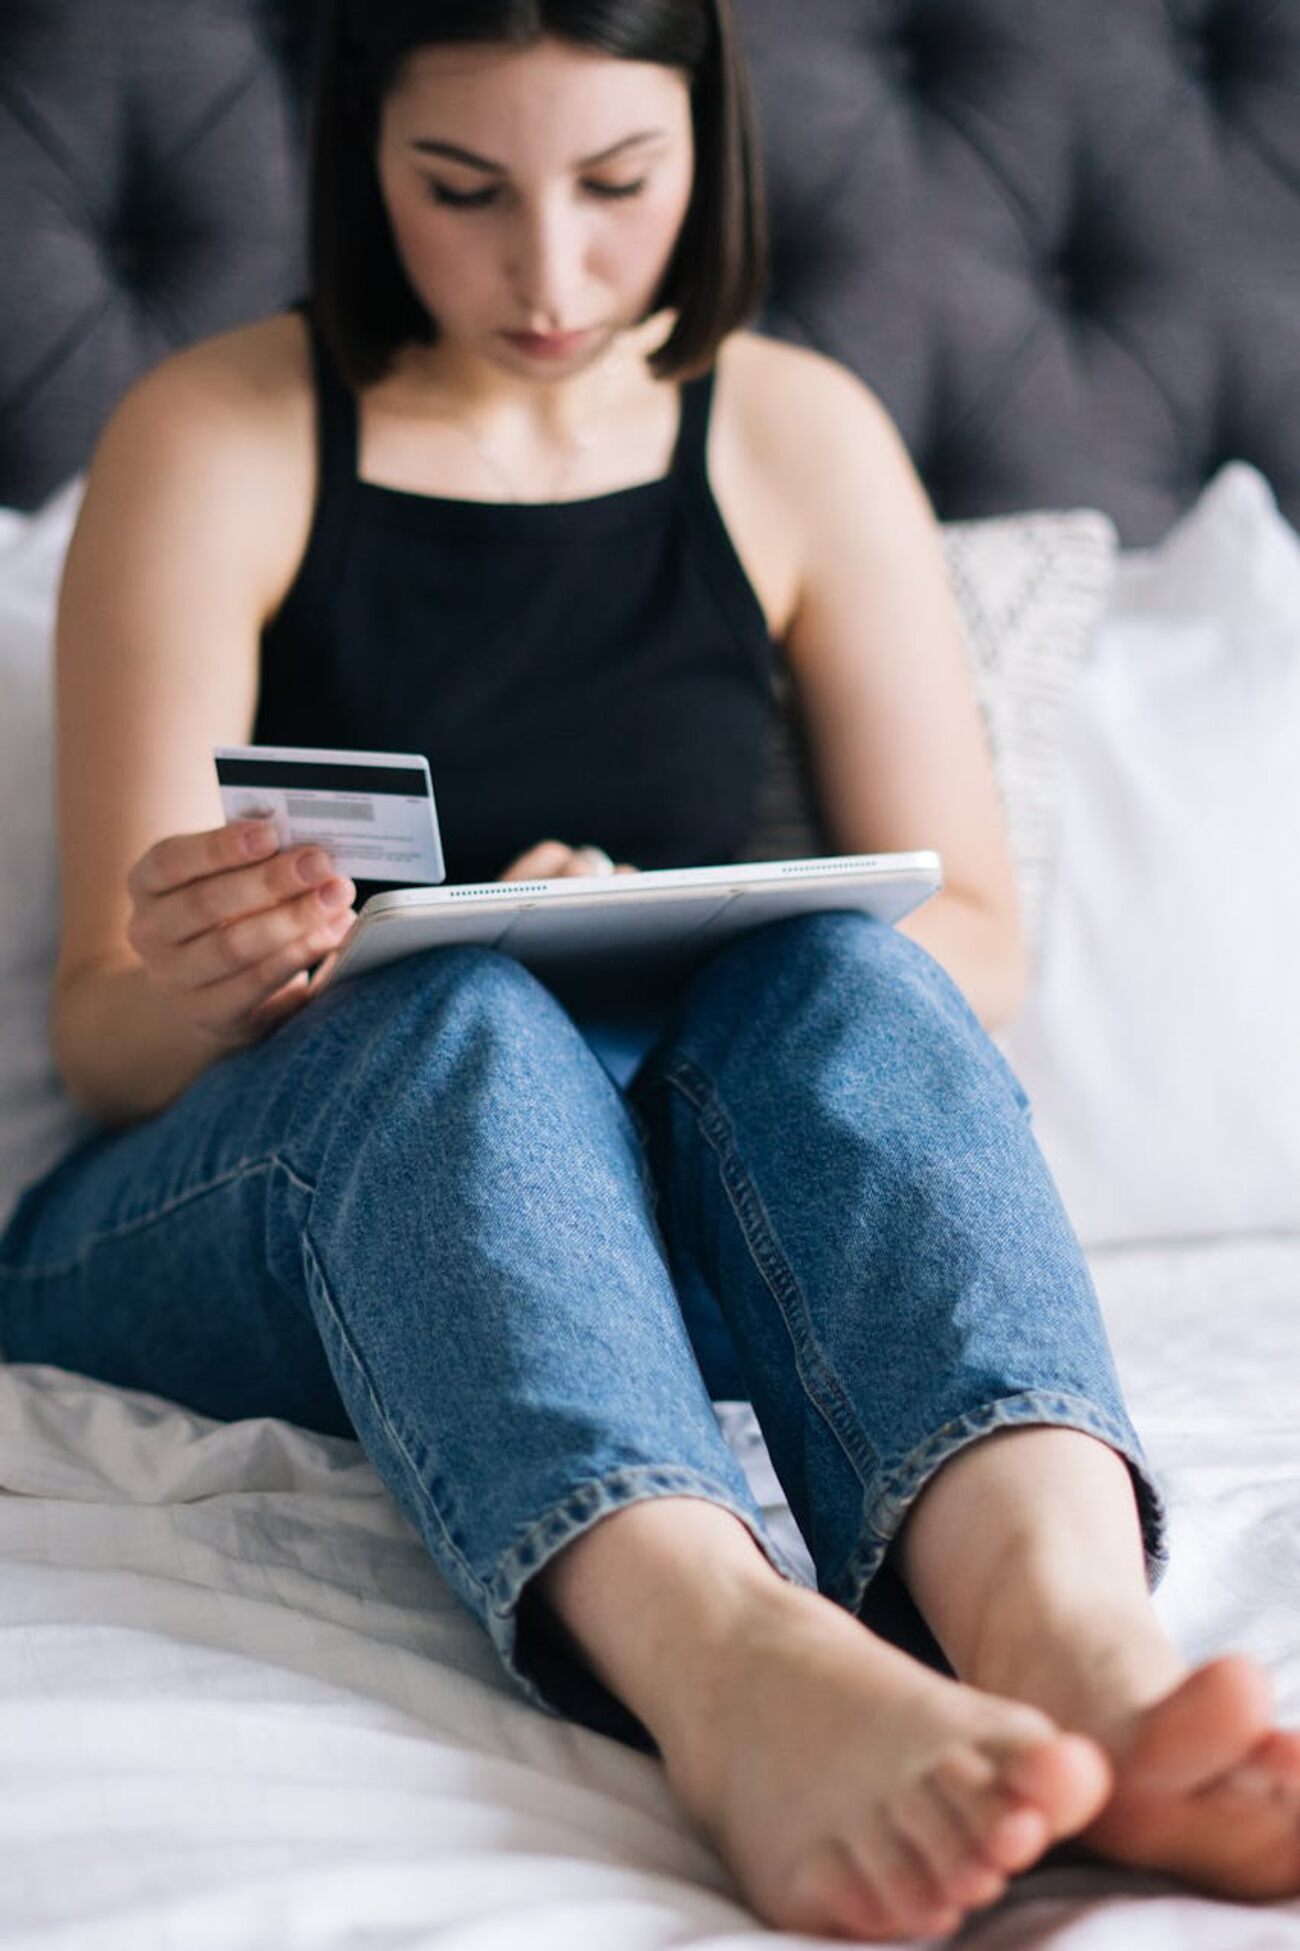 A woman relaxing on a bed, feet up, holding a credit card and tablet